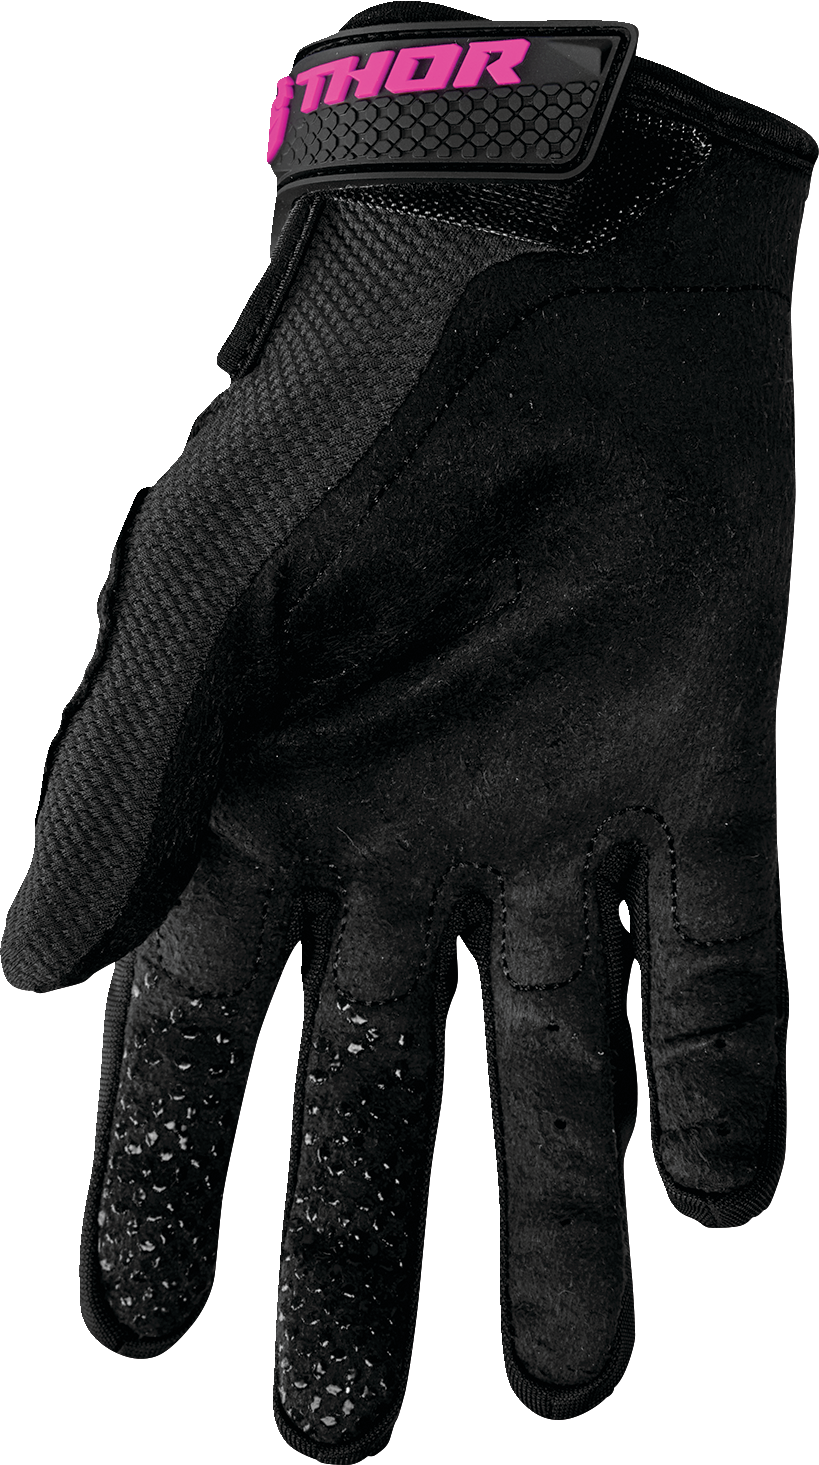 THOR Women's Sector Gloves - Black/Pink - Large 3331-0244